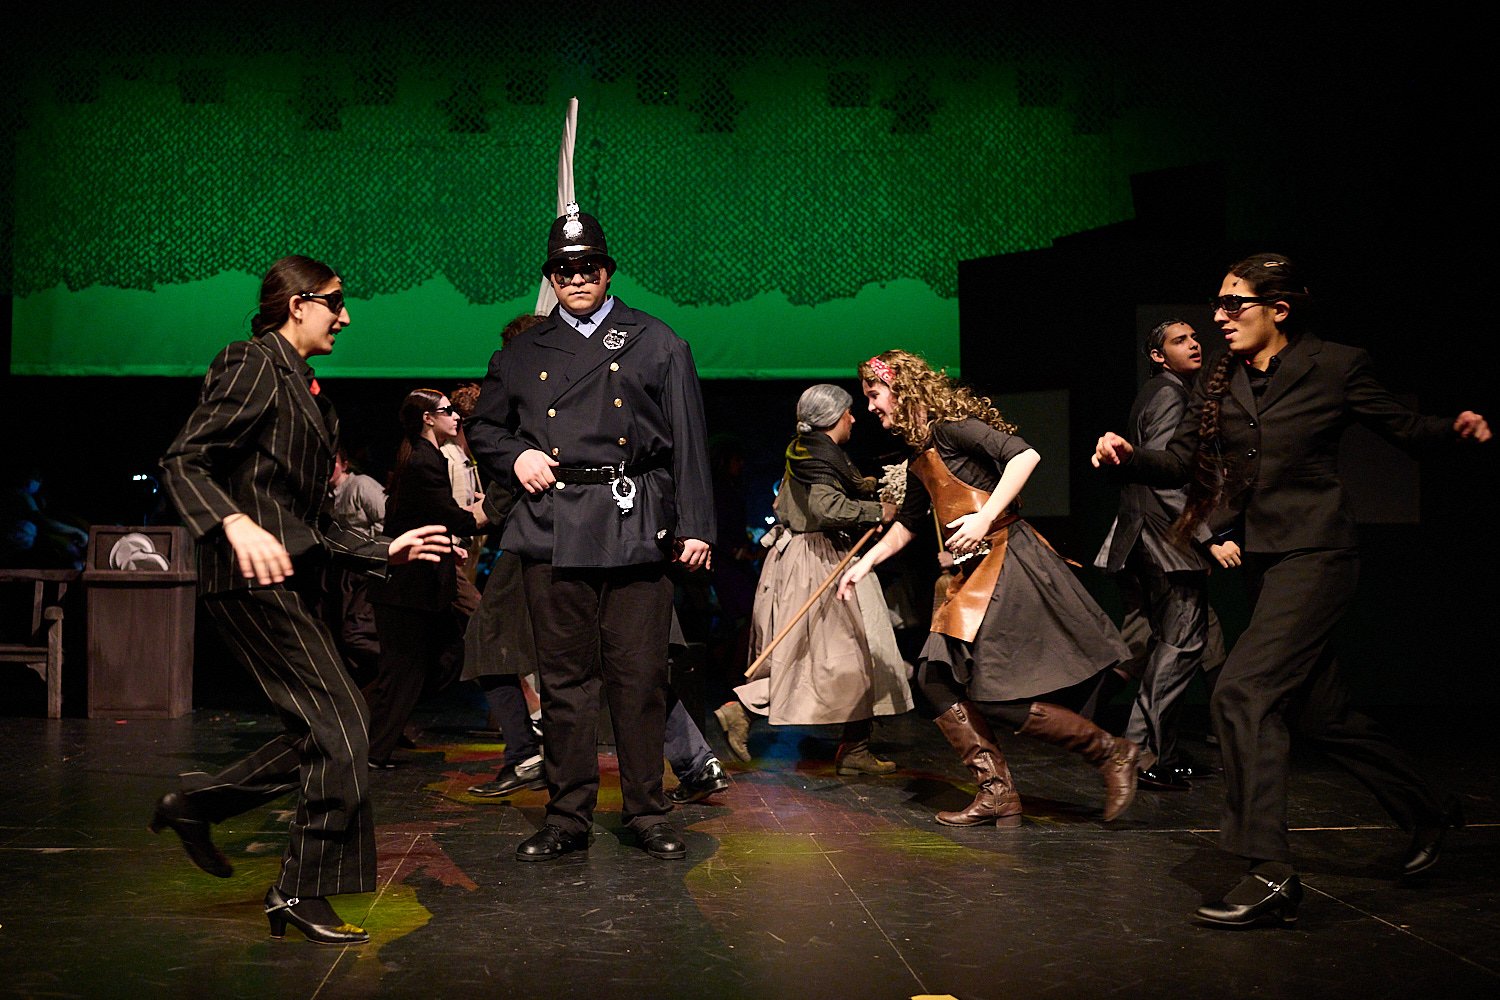  SEWICKLEY, PA, USA - MARCH 2ND 2022: High School students of Sewickley Academy are performing in an annual musical show “Urinetown” running on March 3rd-5th 2022. Avni Kathju 